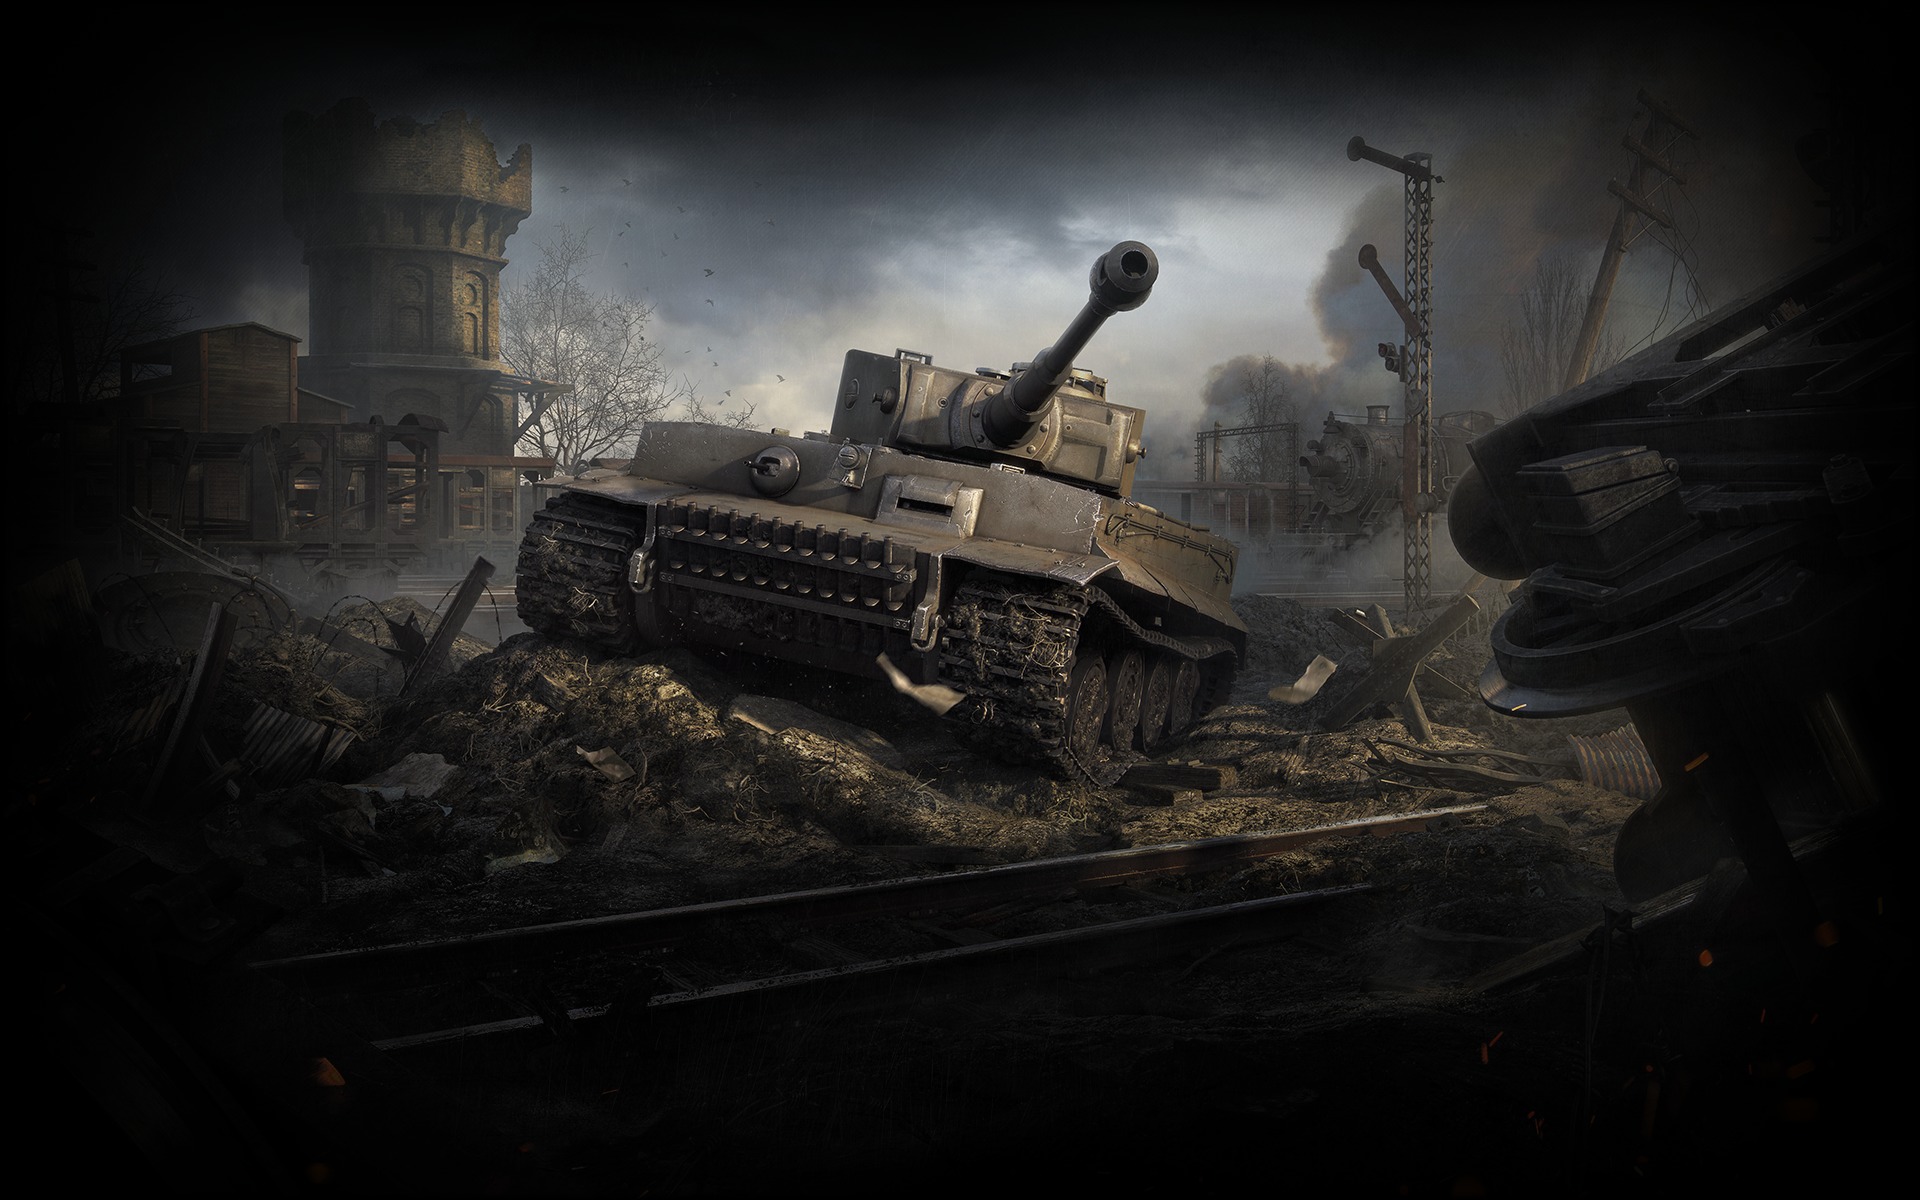  world of tanks wg tiger i heavy tank wallpapers photos pictures